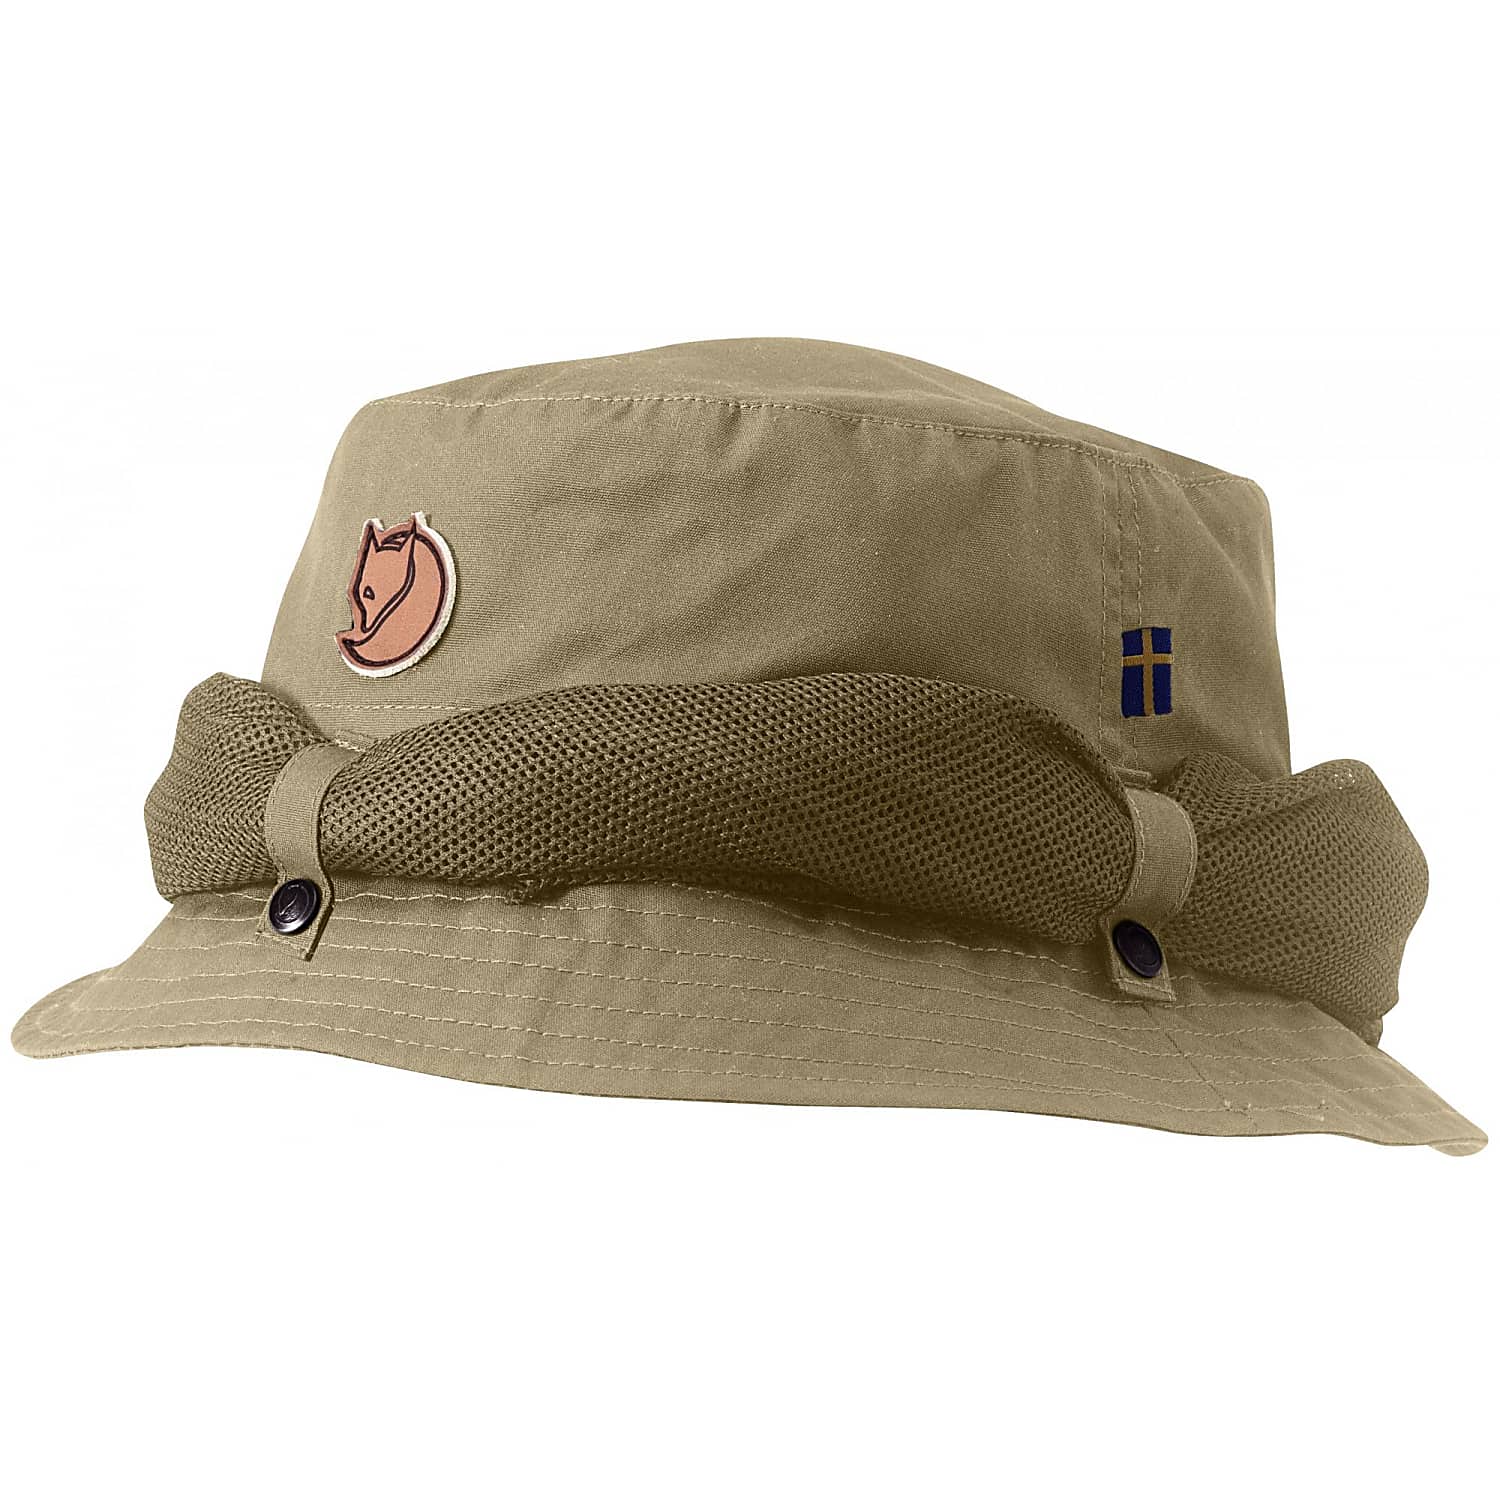 Fjallraven MARLIN MOSQUITO HAT, - Fast and - www.exxpozed.com